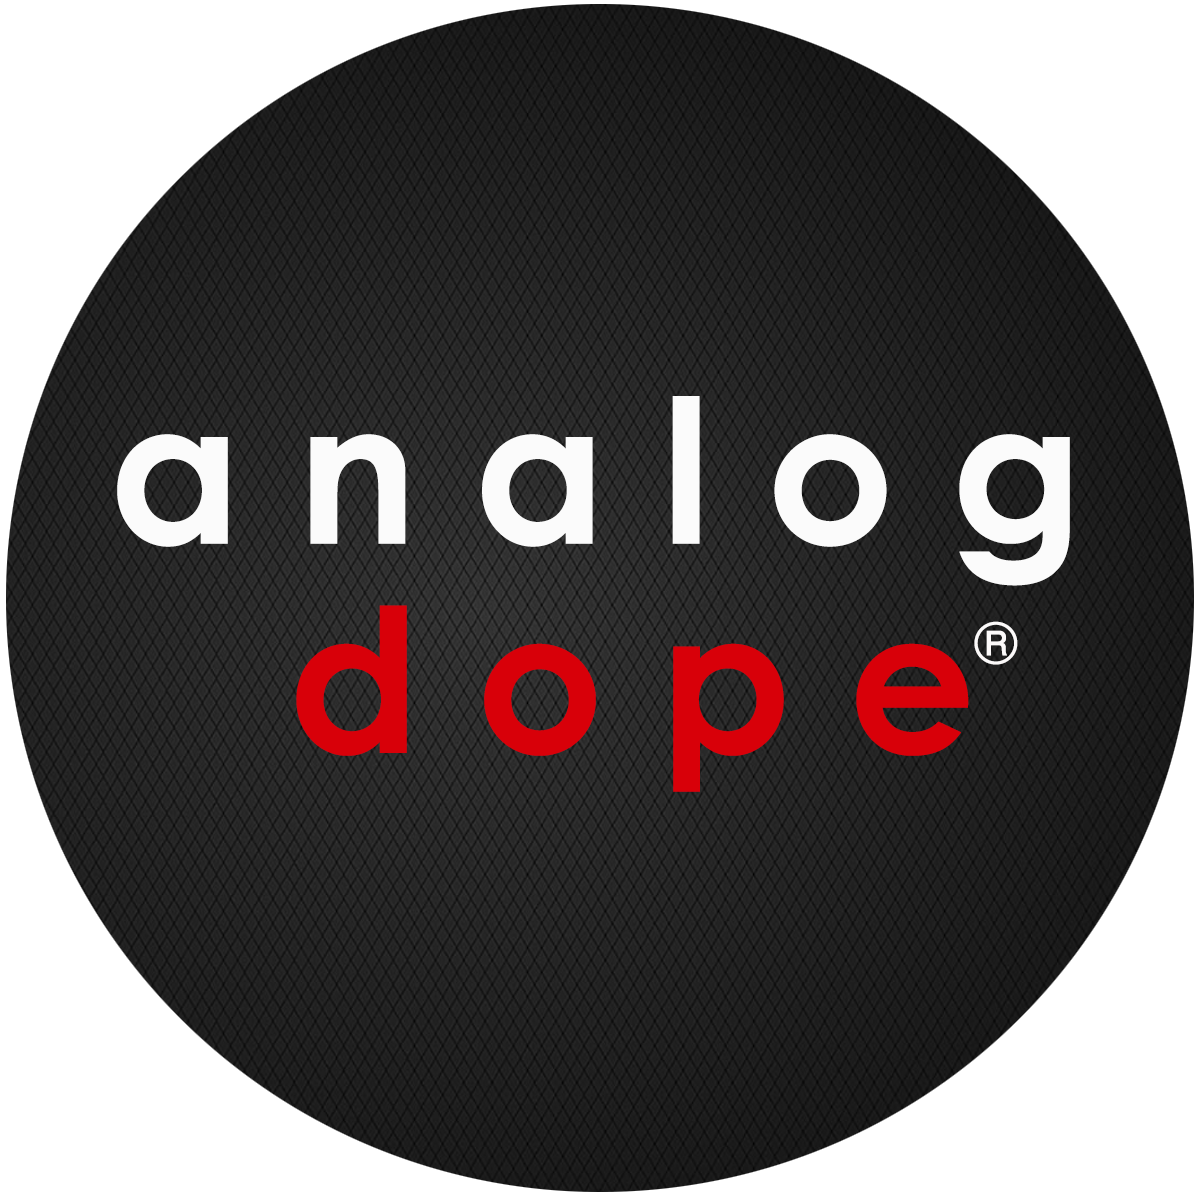 The Analog Dope Store